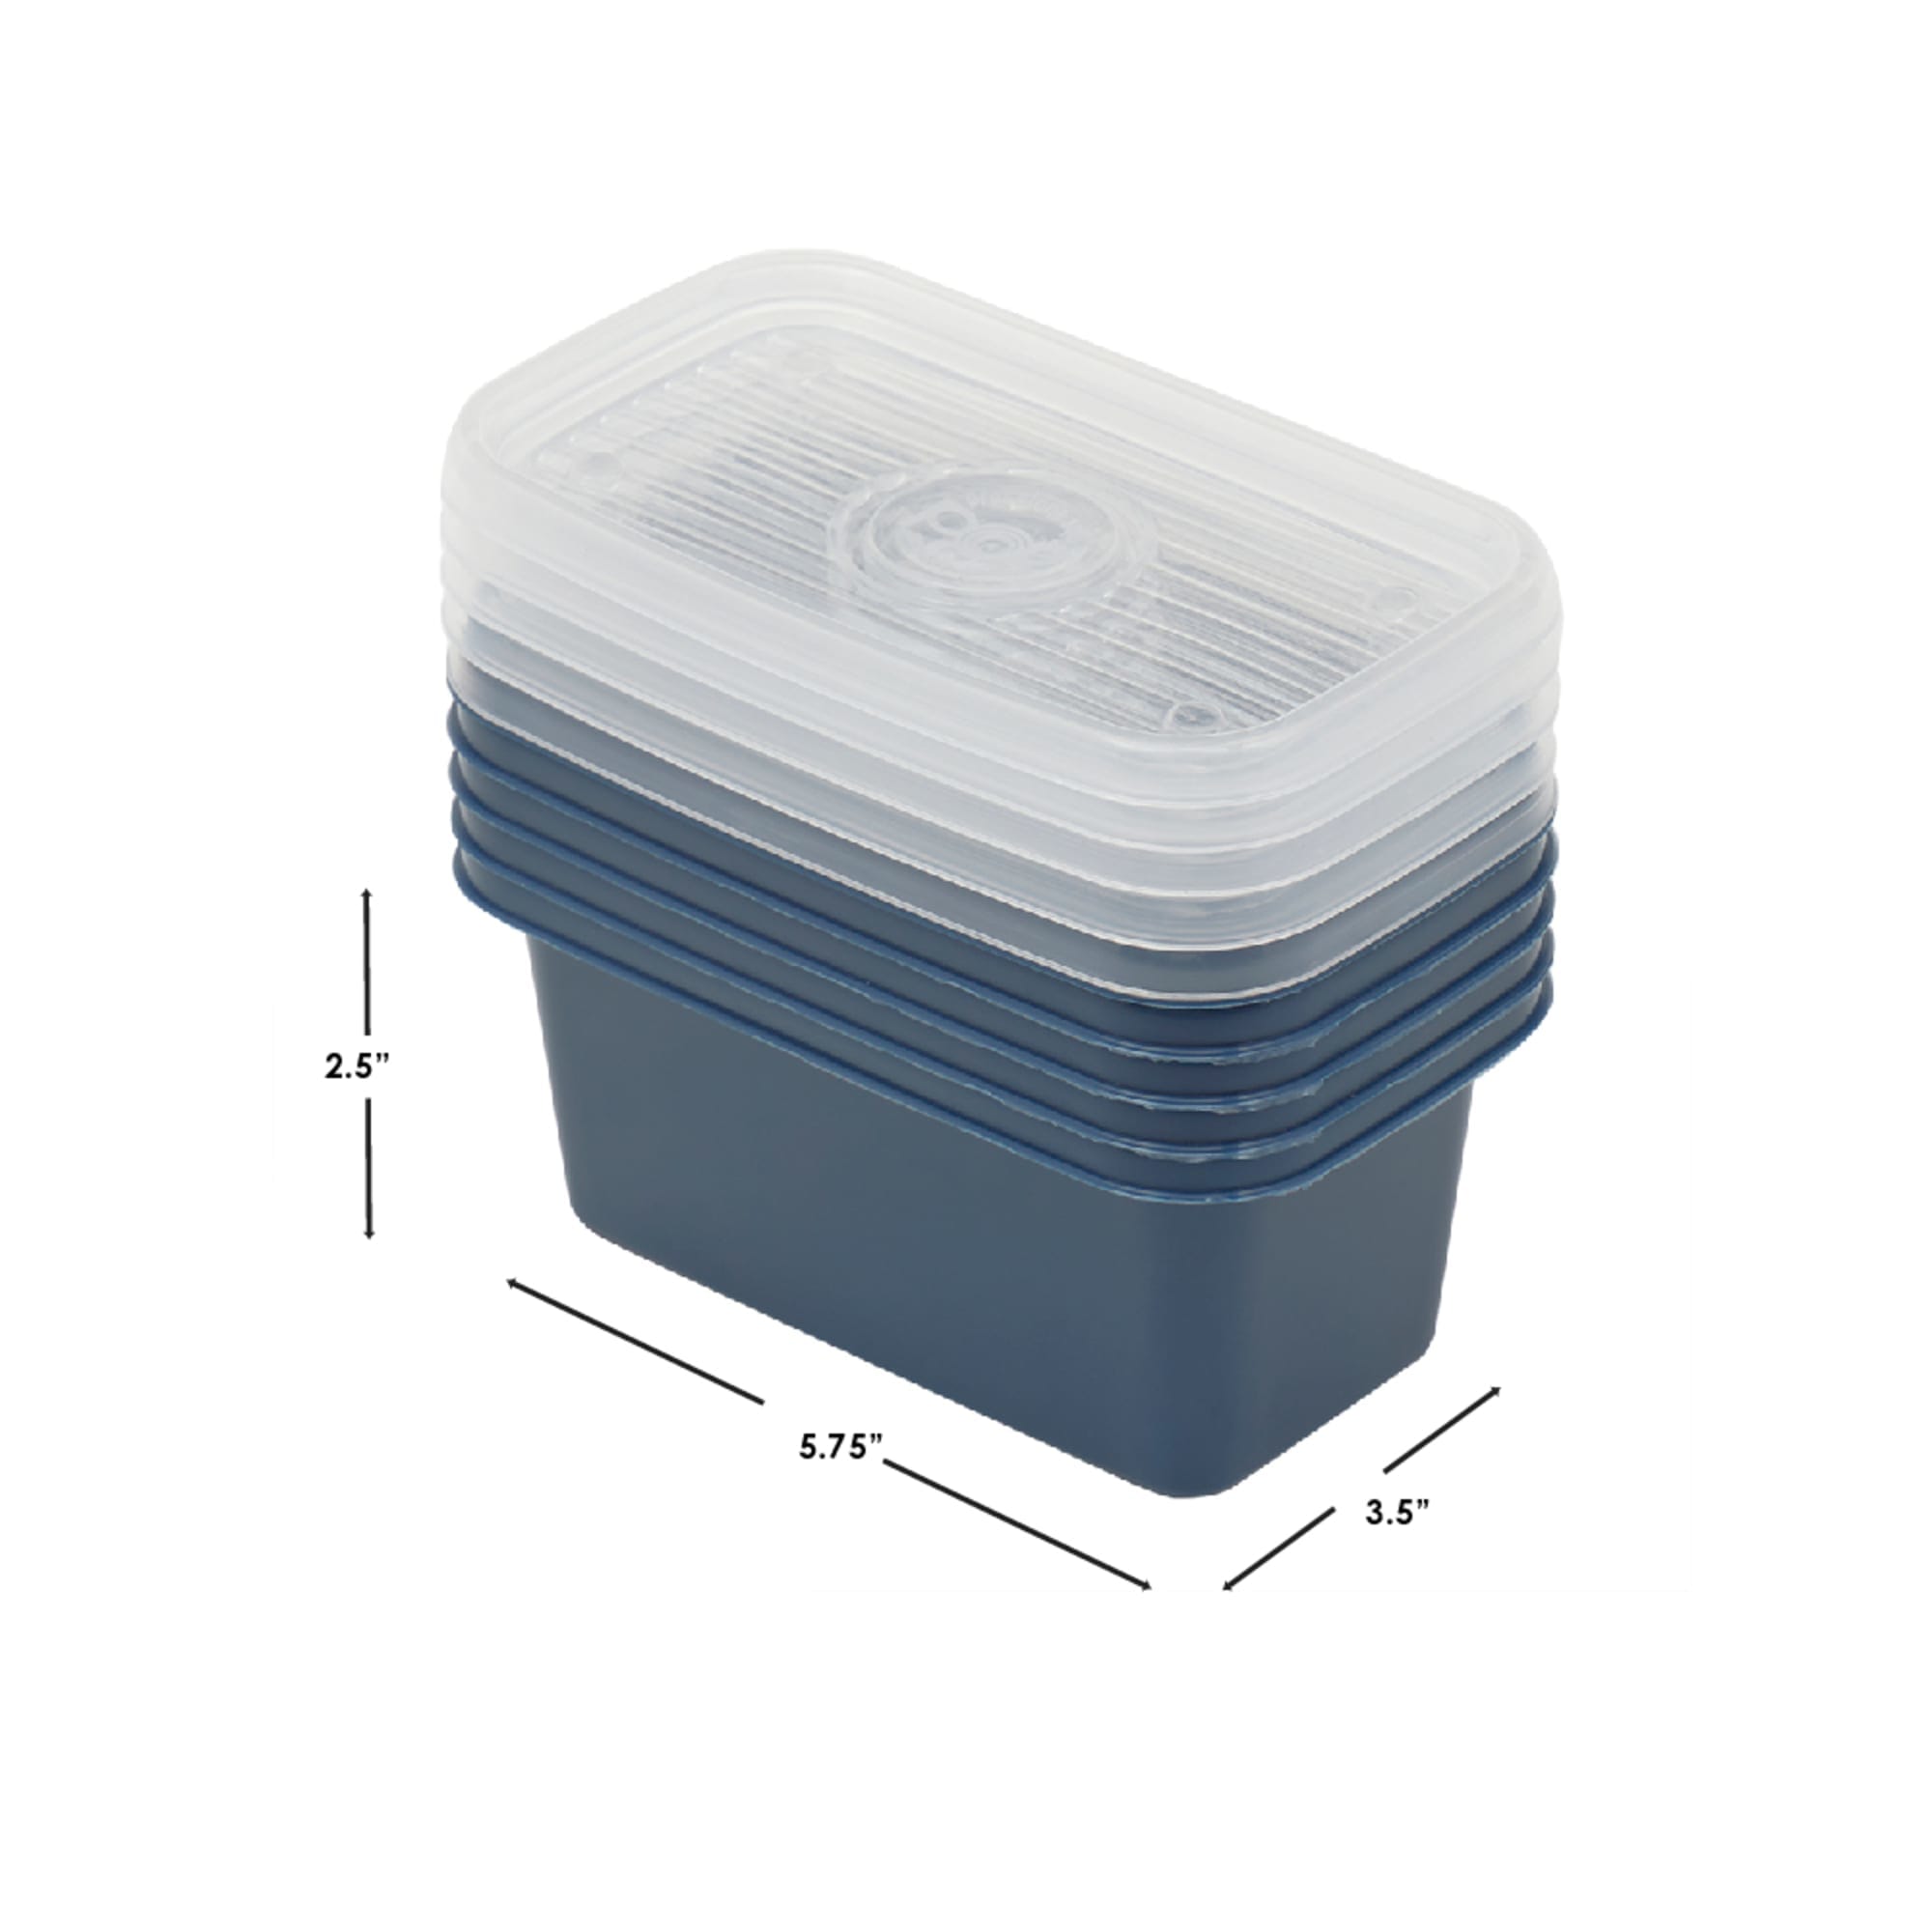 2 Compartment Meal Prep Food Containers (10 Pack)